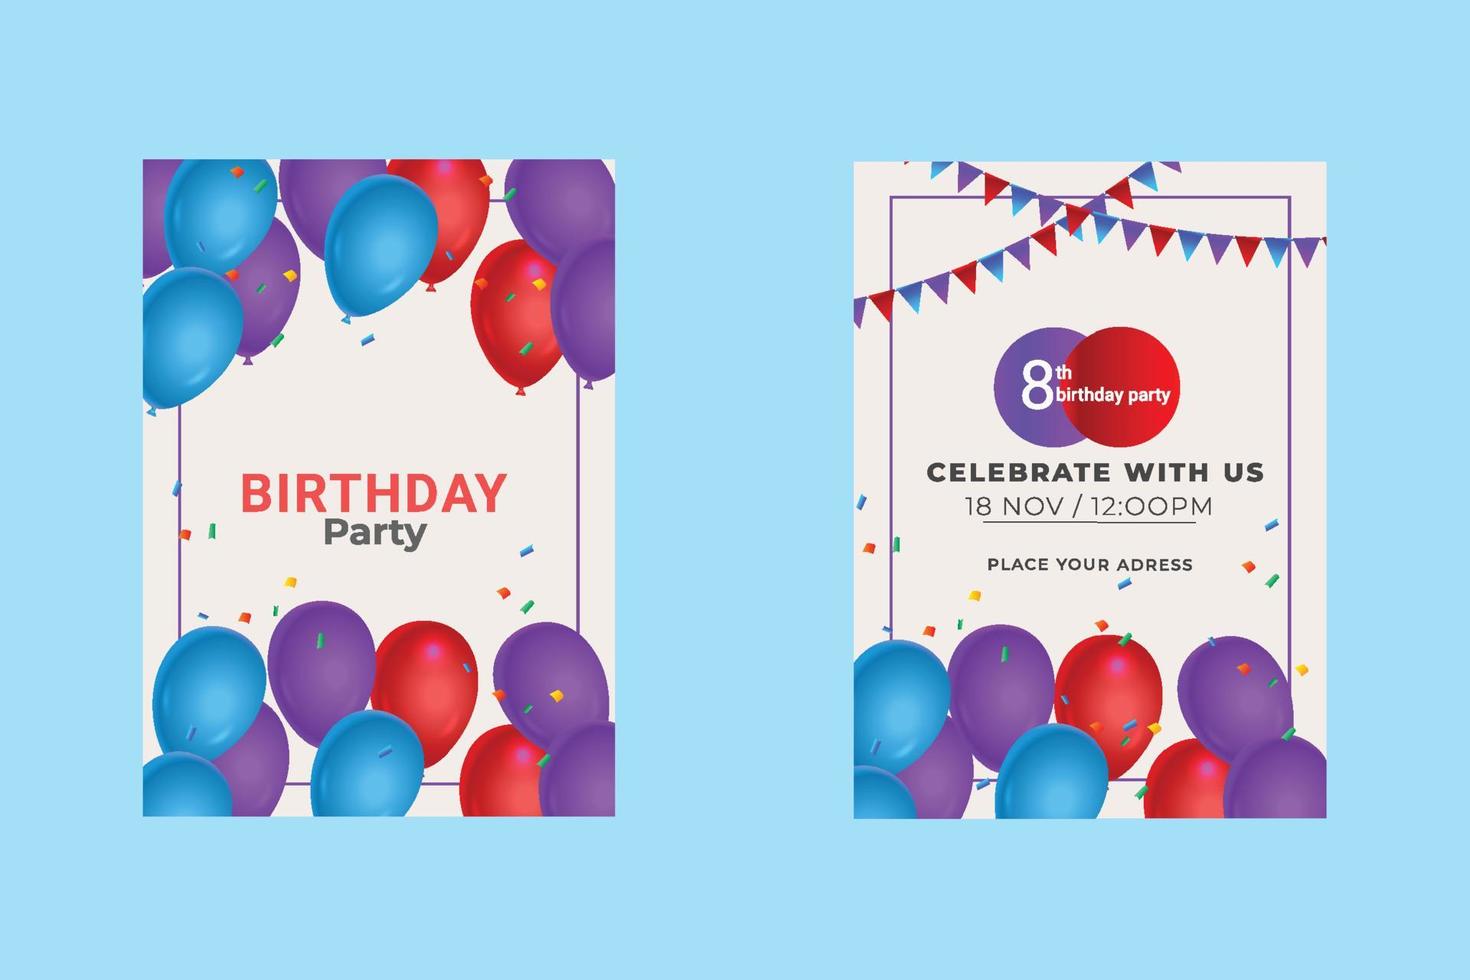 Happy Birthday  card decoration with  balloons vector